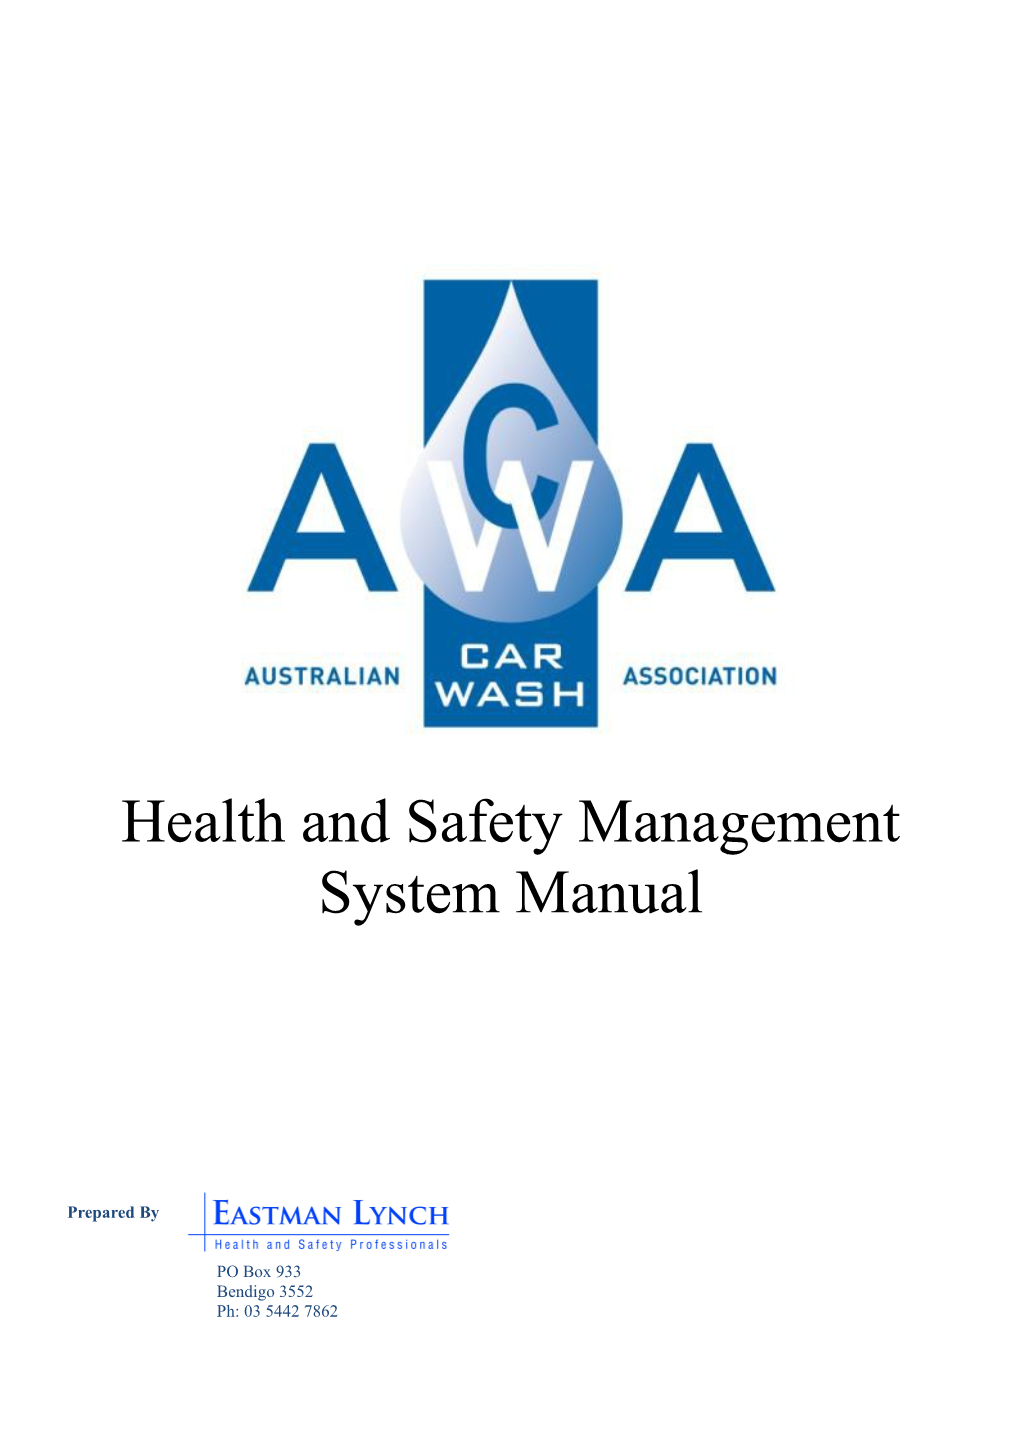 Health and Safety Management System Manual